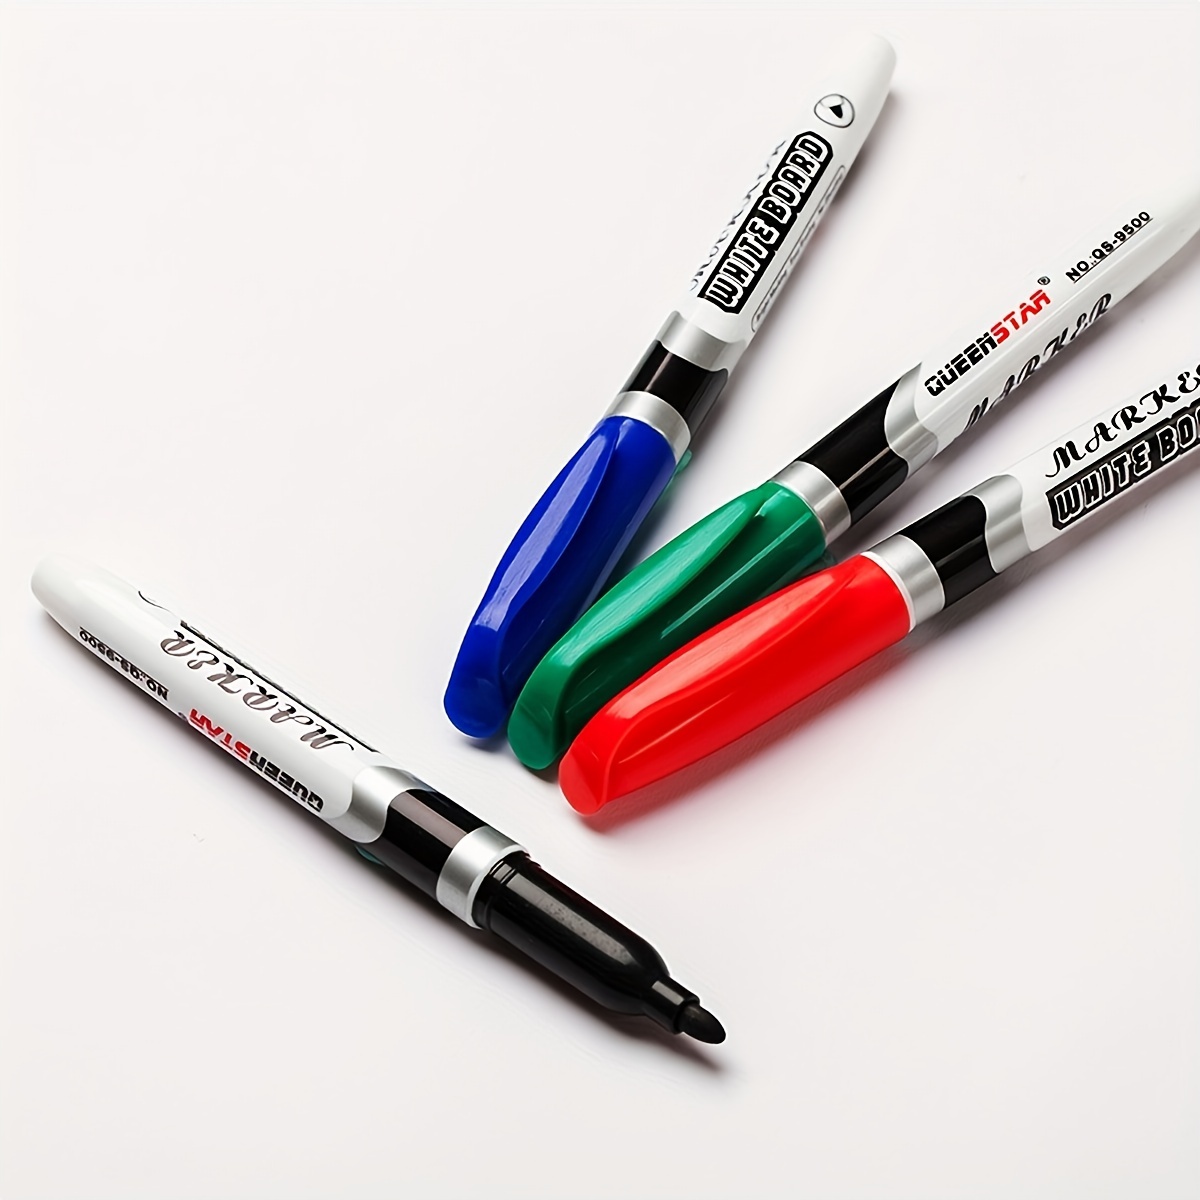 

4pcs Whiteboard Pens, 4 Colors Erasable Whiteboard Pens, Students Teaching Special Drawing Board Pens, Easy To Erase And Write, Oil-based Black And Color Whiteboard Pens